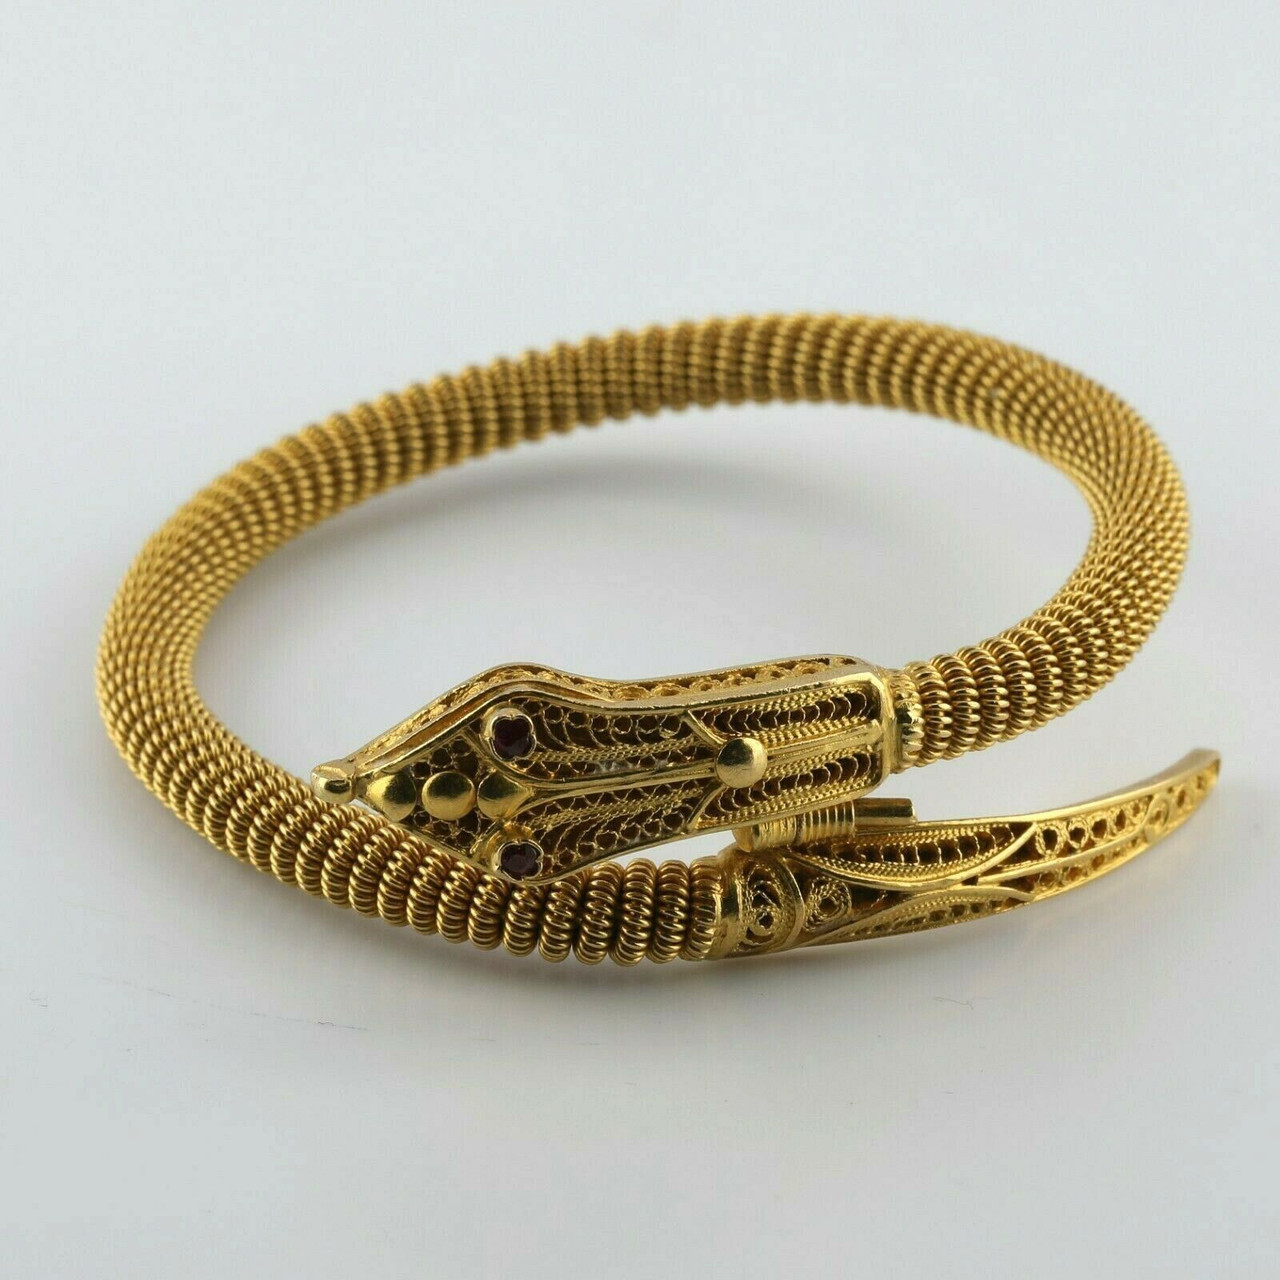 Massage Træ propel Snake Bracelet Super Hand Made 21K Yellow Gold Filigree Head and Ruby Eyes  - Colonial Trading Company